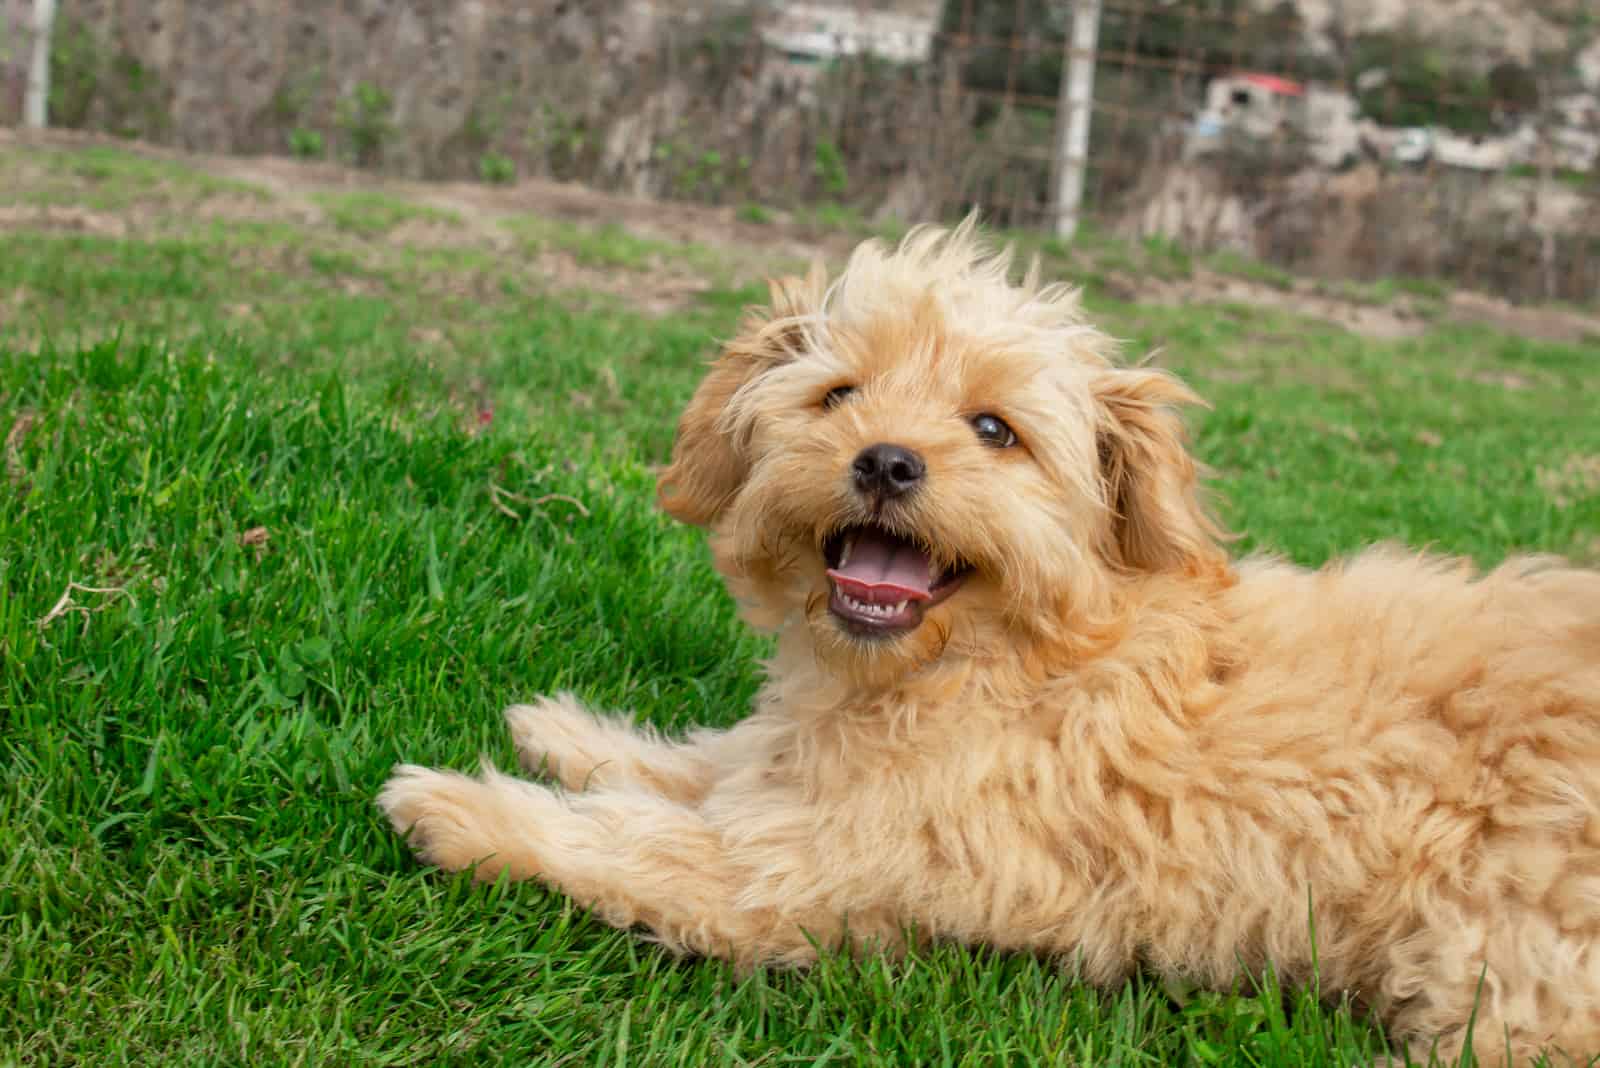 Mini Goldendoodle puppy lying on a green lawn